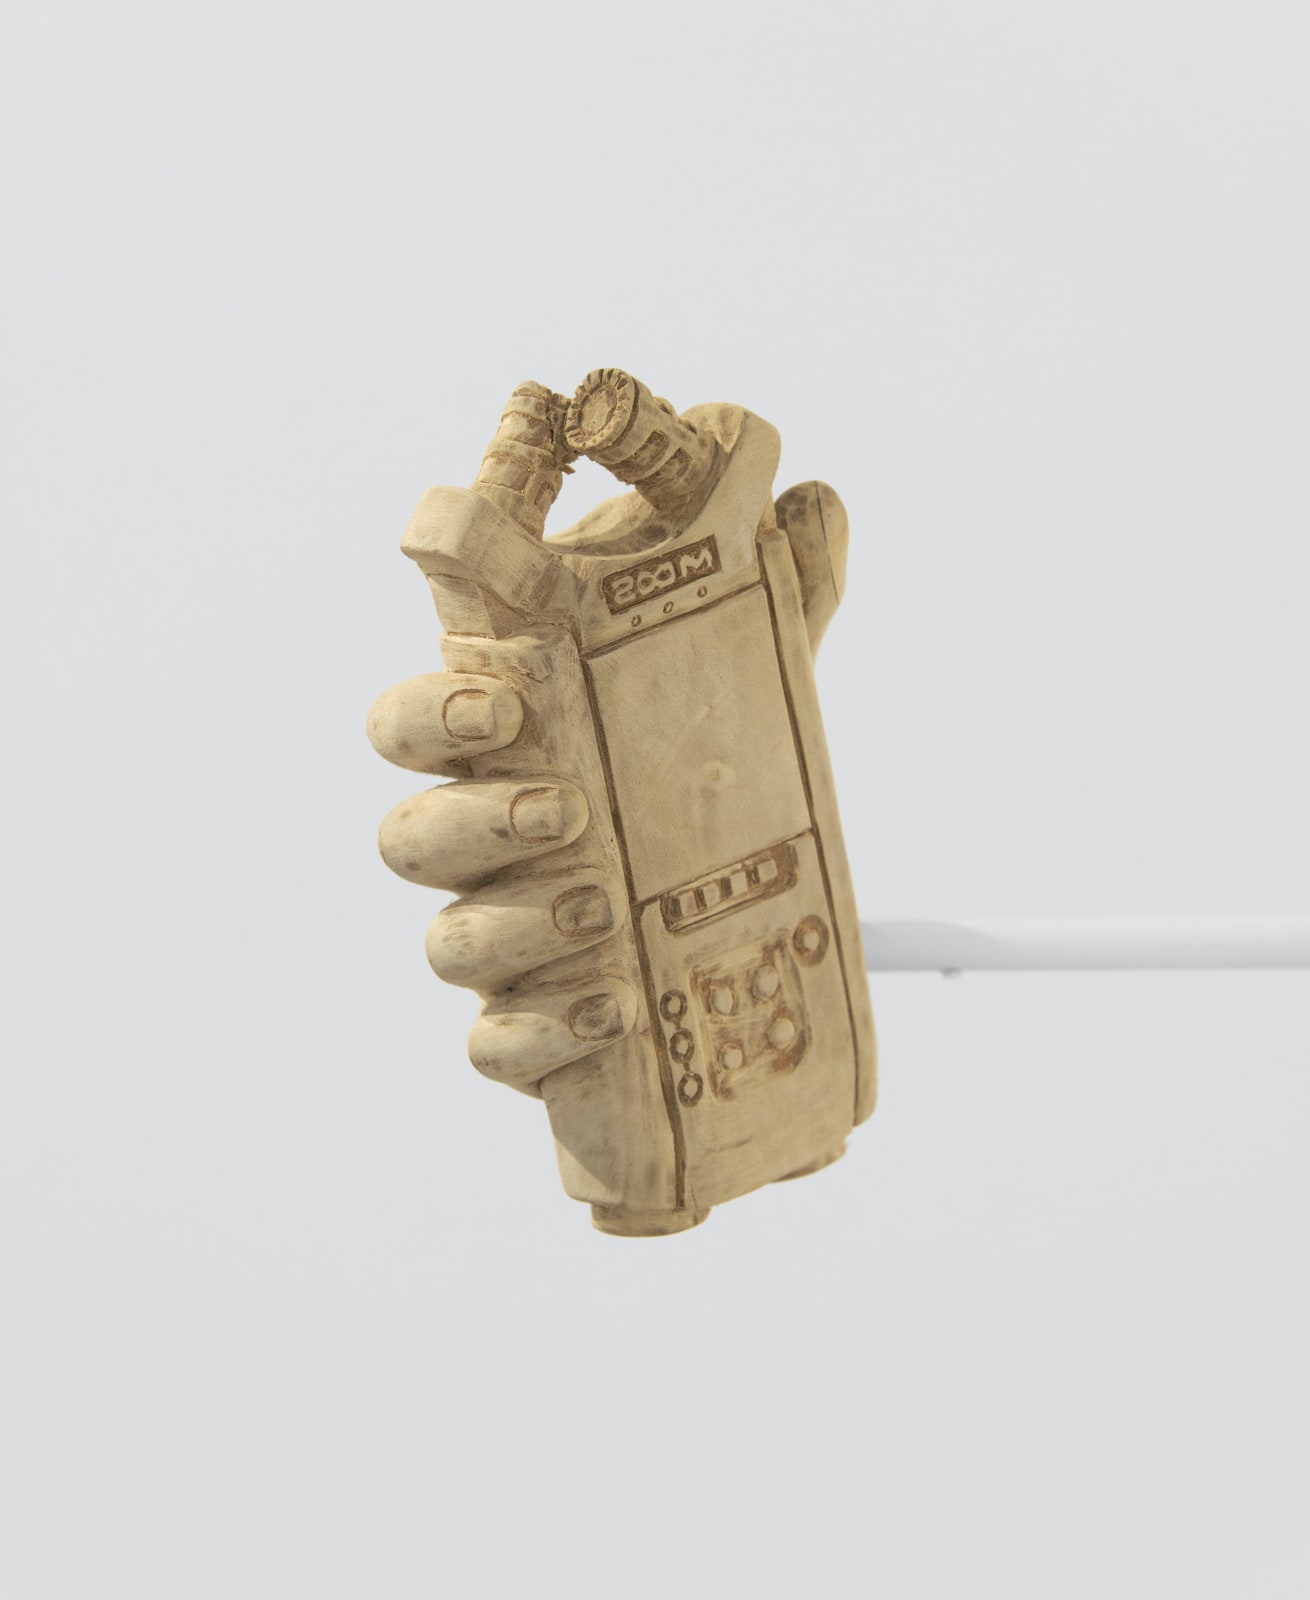 Hand Holding Audio Recorder, 2018 3D print duplicated in Santol wood, 16.4 x 22.3 x 11 cm